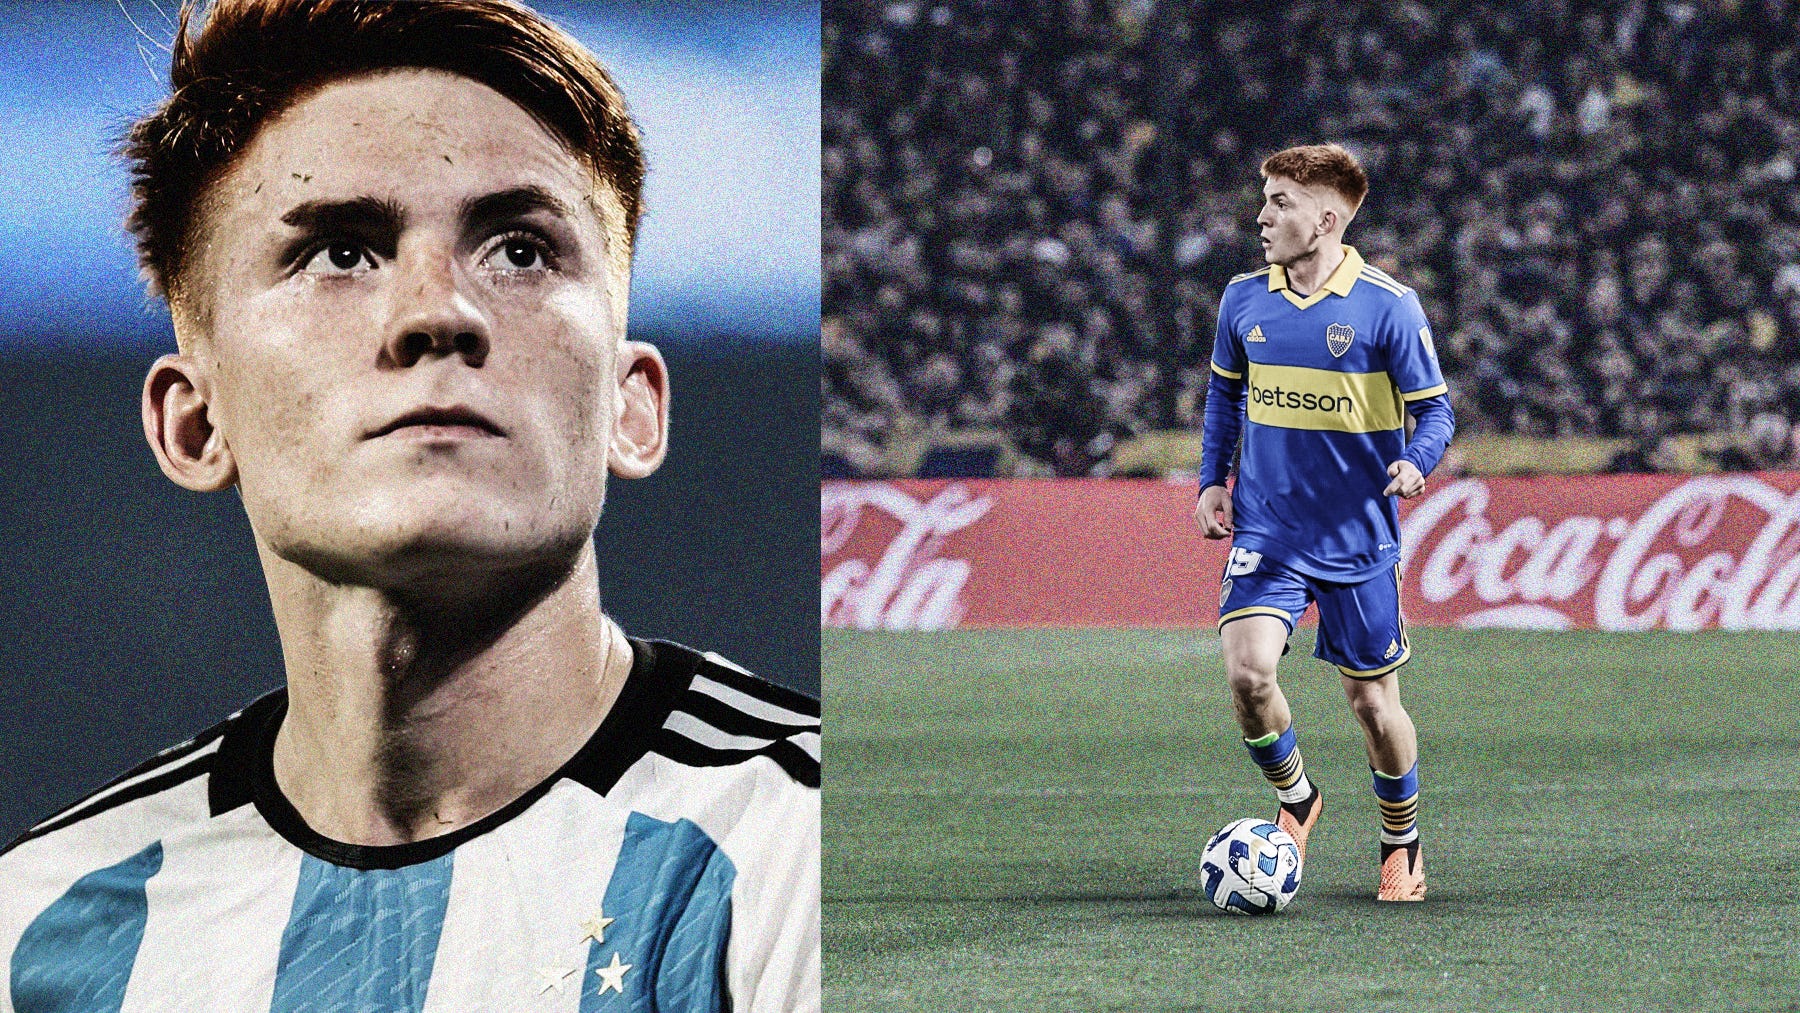 A composite image featuring two photos of Valentín Barco – left, a close-up of Barco in an Argentina shirt; right, a wide-frame photo of him carrying the ball for Boca Juniors